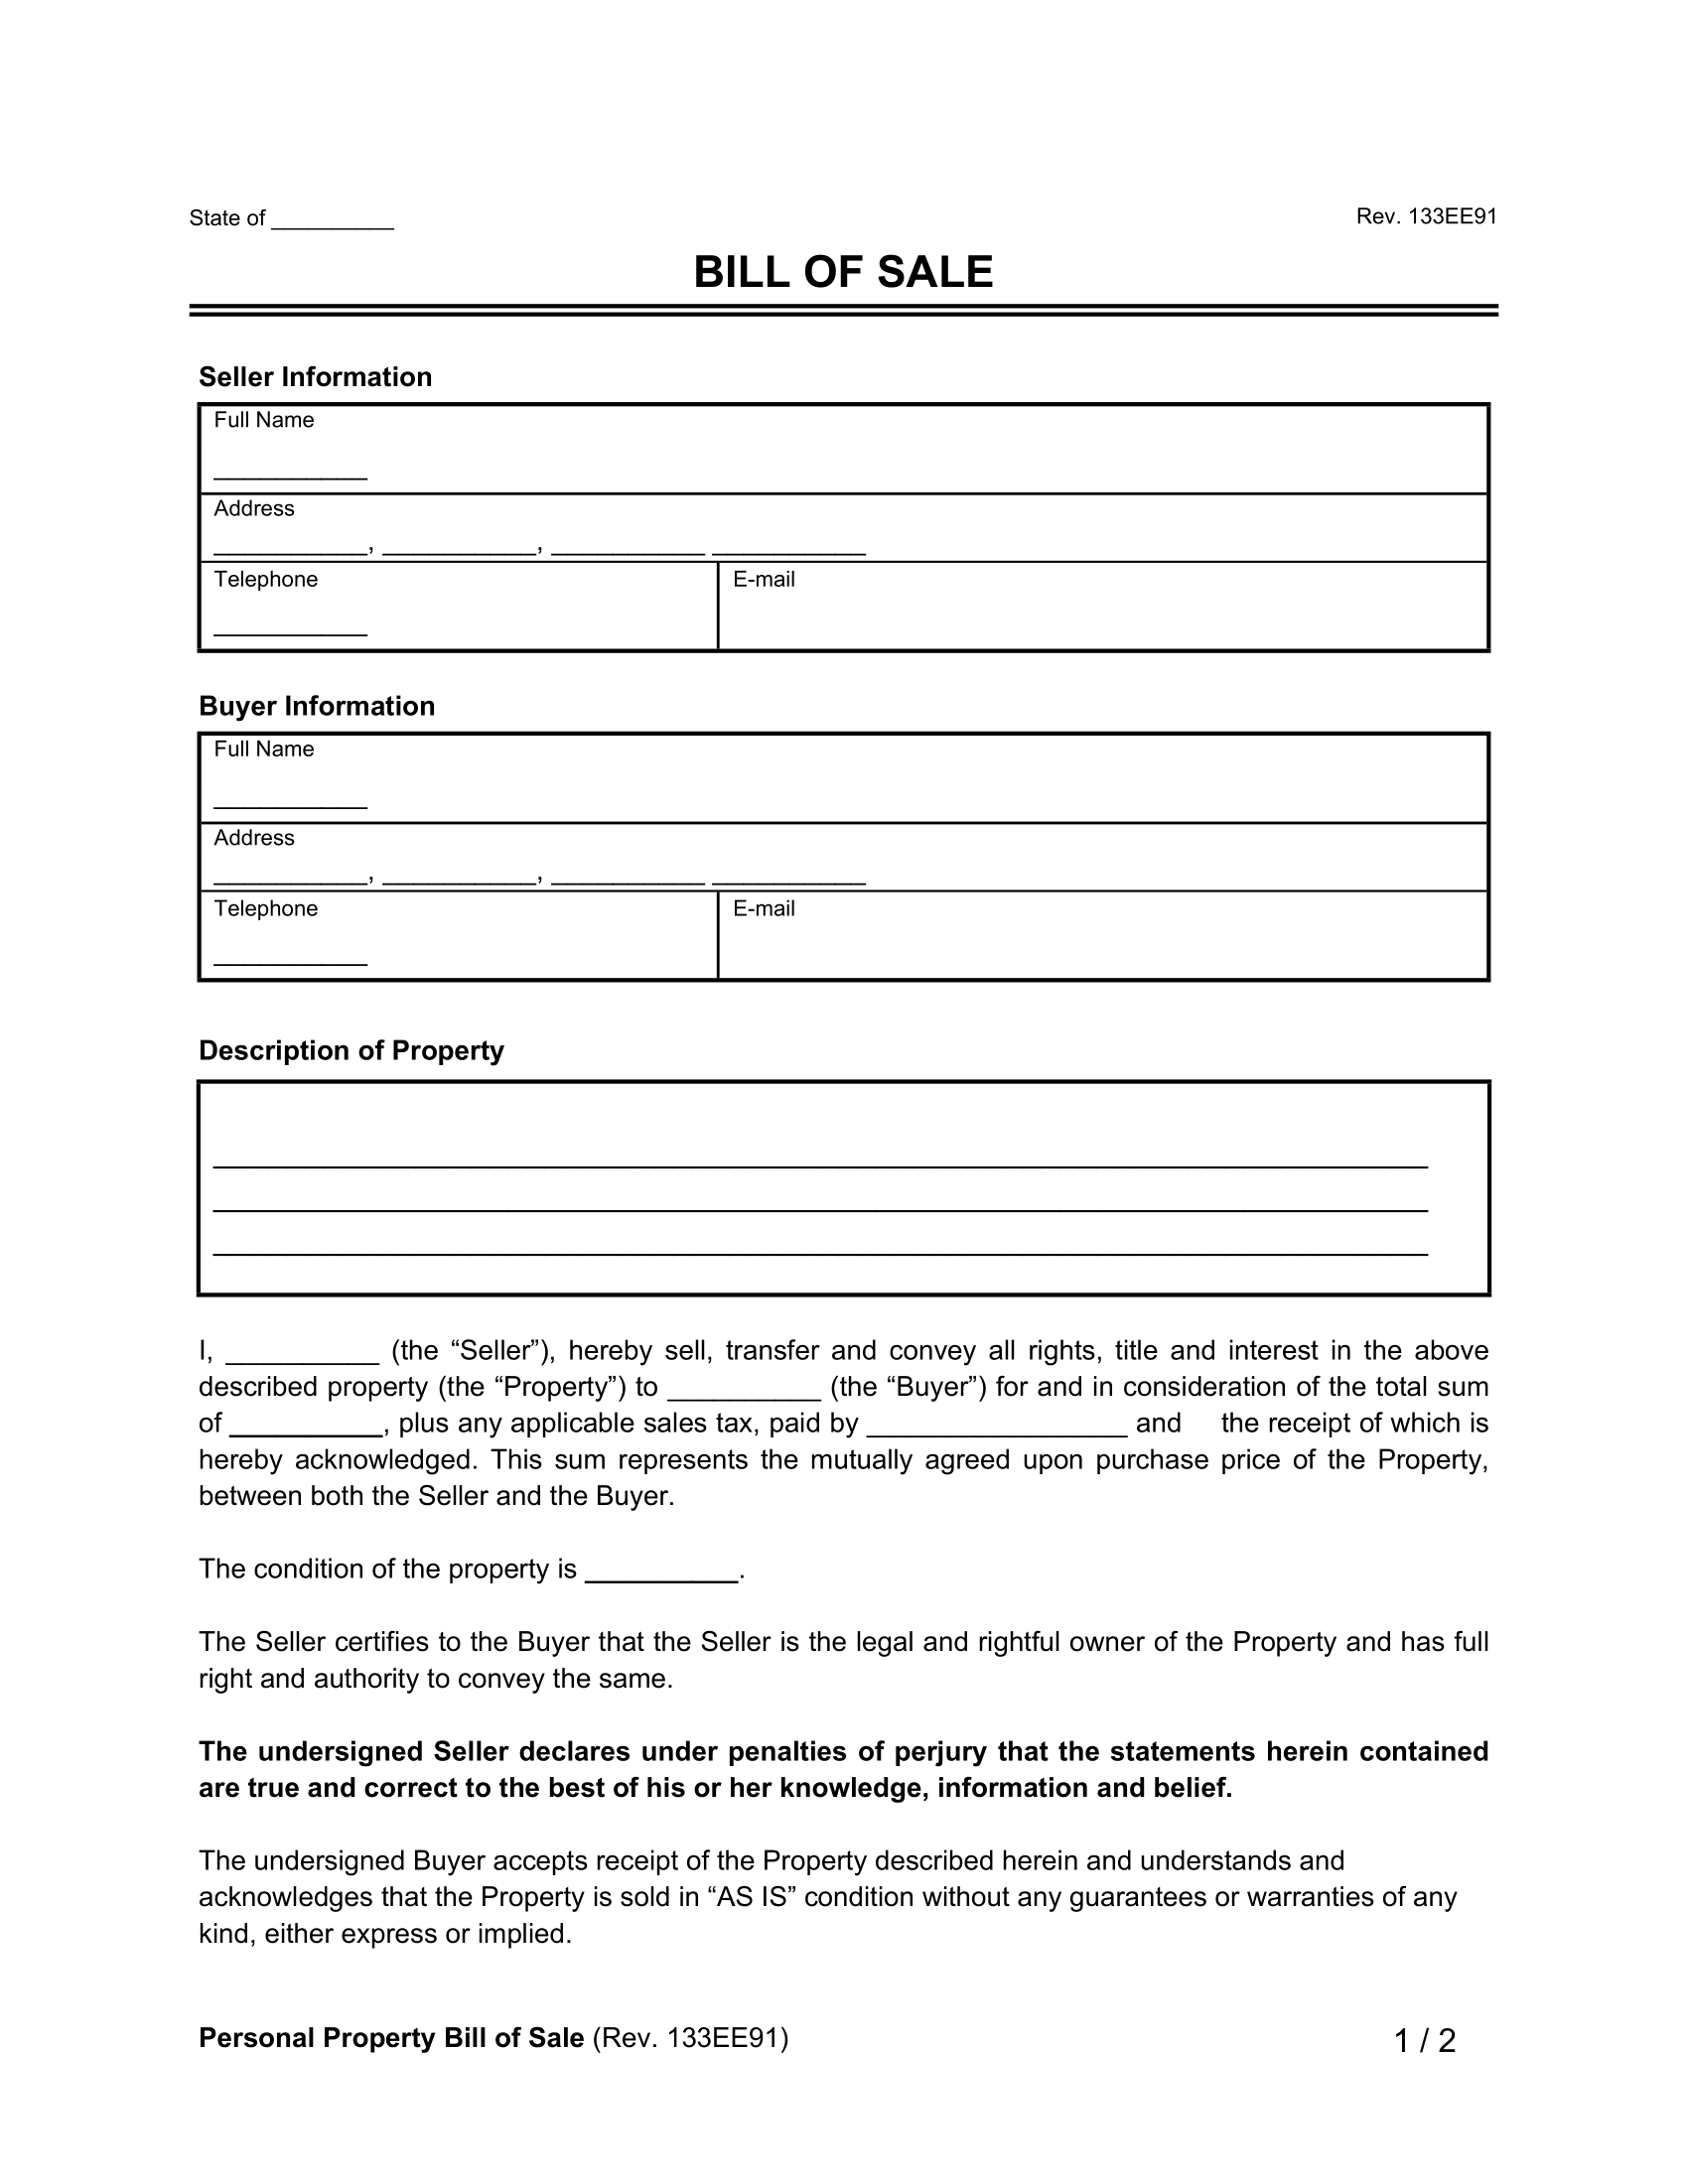 Free Bill of Sale Forms (31)